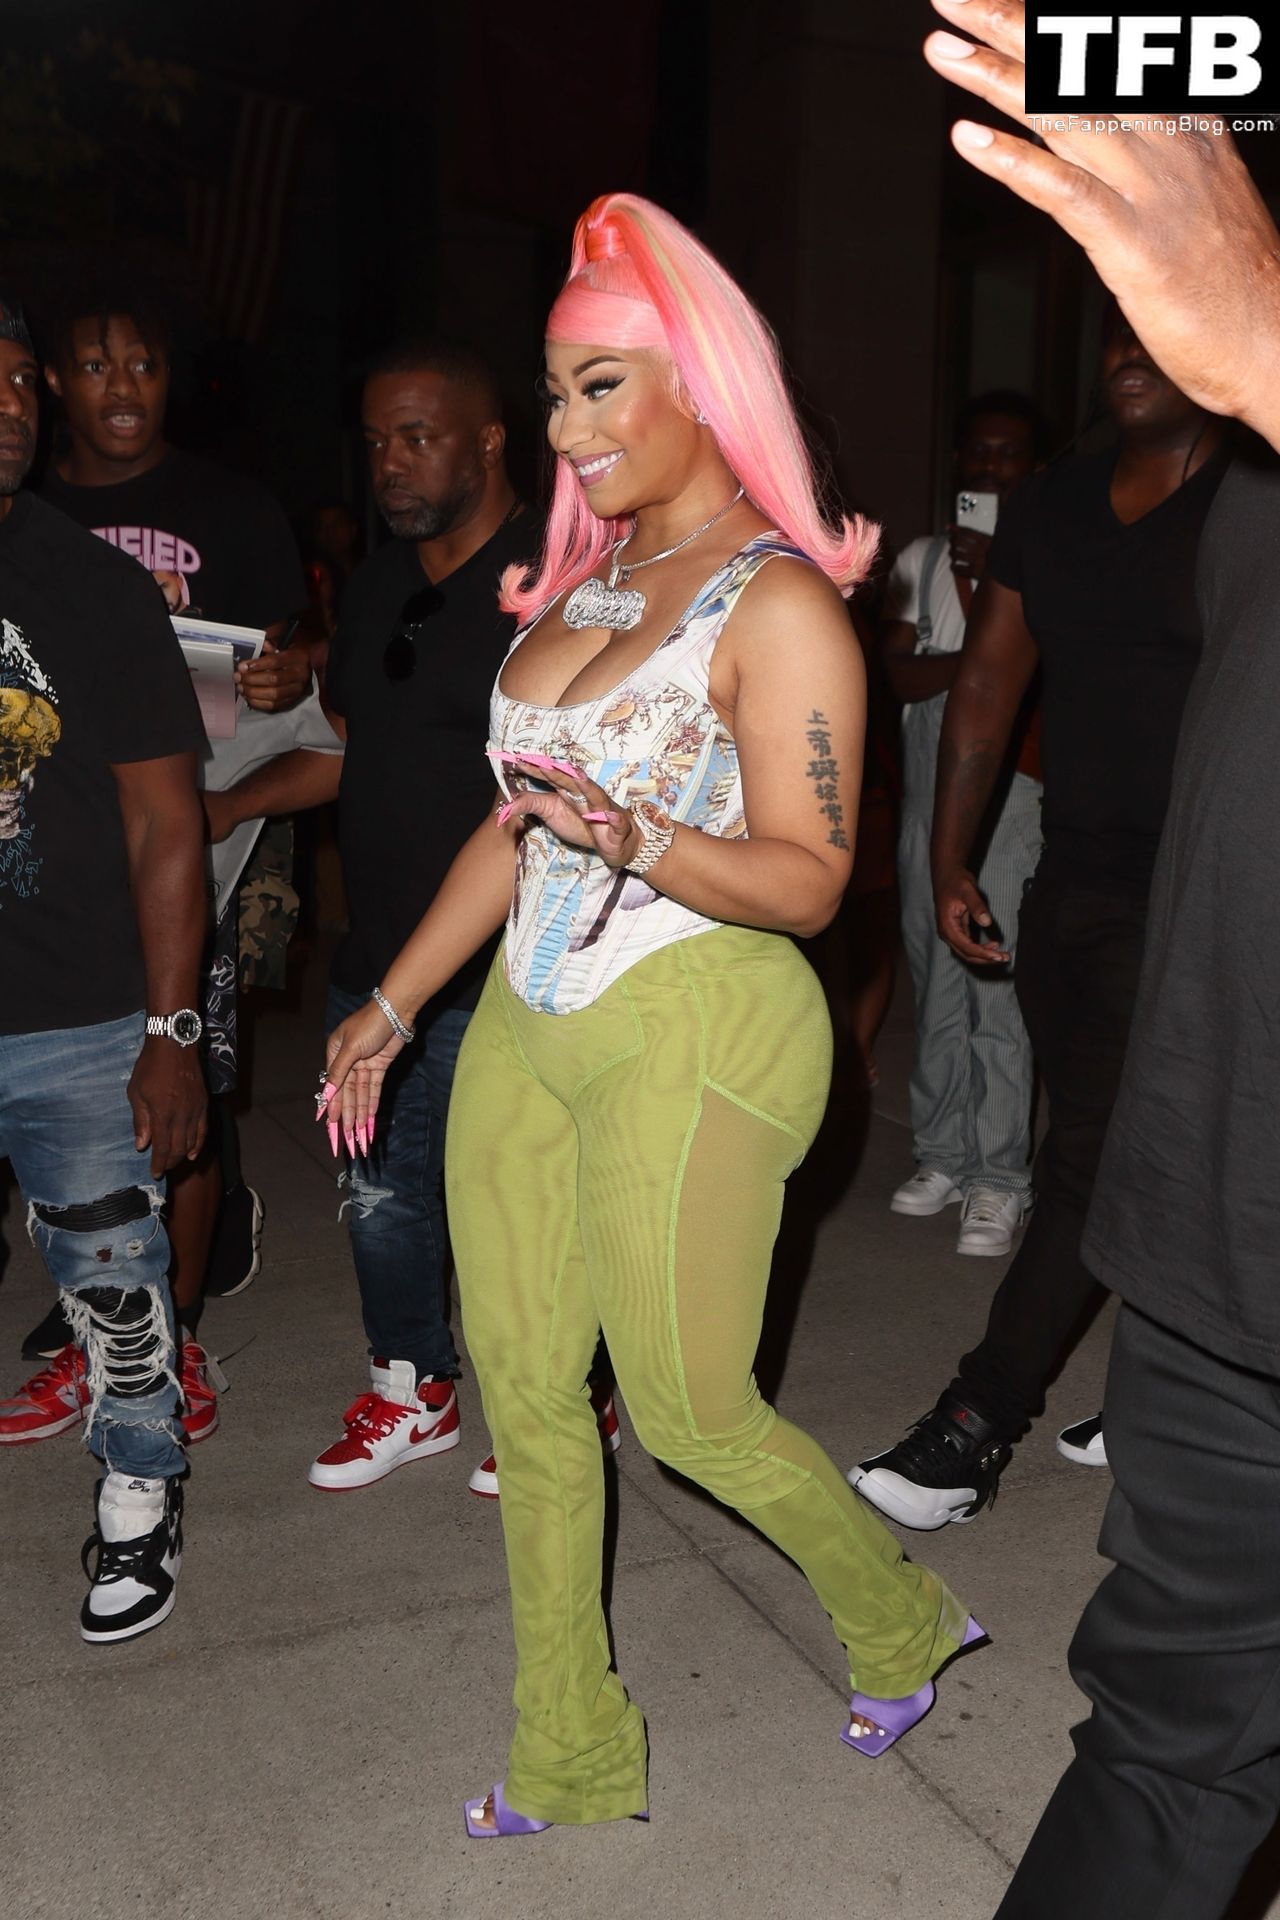 Nicki Minaj Sexy The Fappening Blog 17 - Nicki Minaj Checks Out of Her Hotel After Her Epic Night at the MTV VMA’s in NYC (38 Photos)